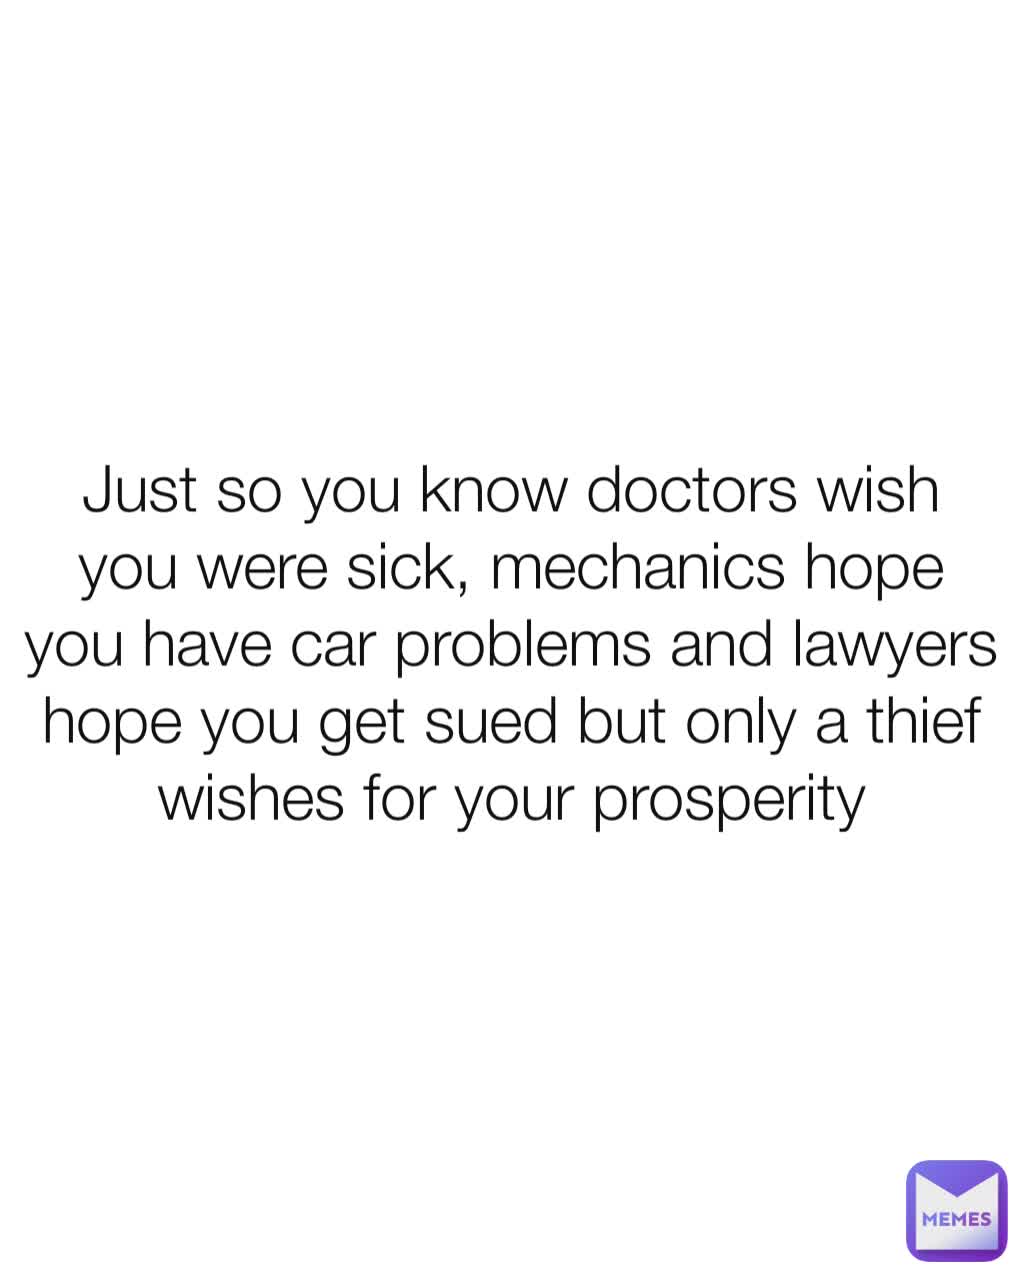 Just so you know doctors wish you were sick, mechanics hope you have car problems and lawyers hope you get sued but only a thief wishes for your prosperity